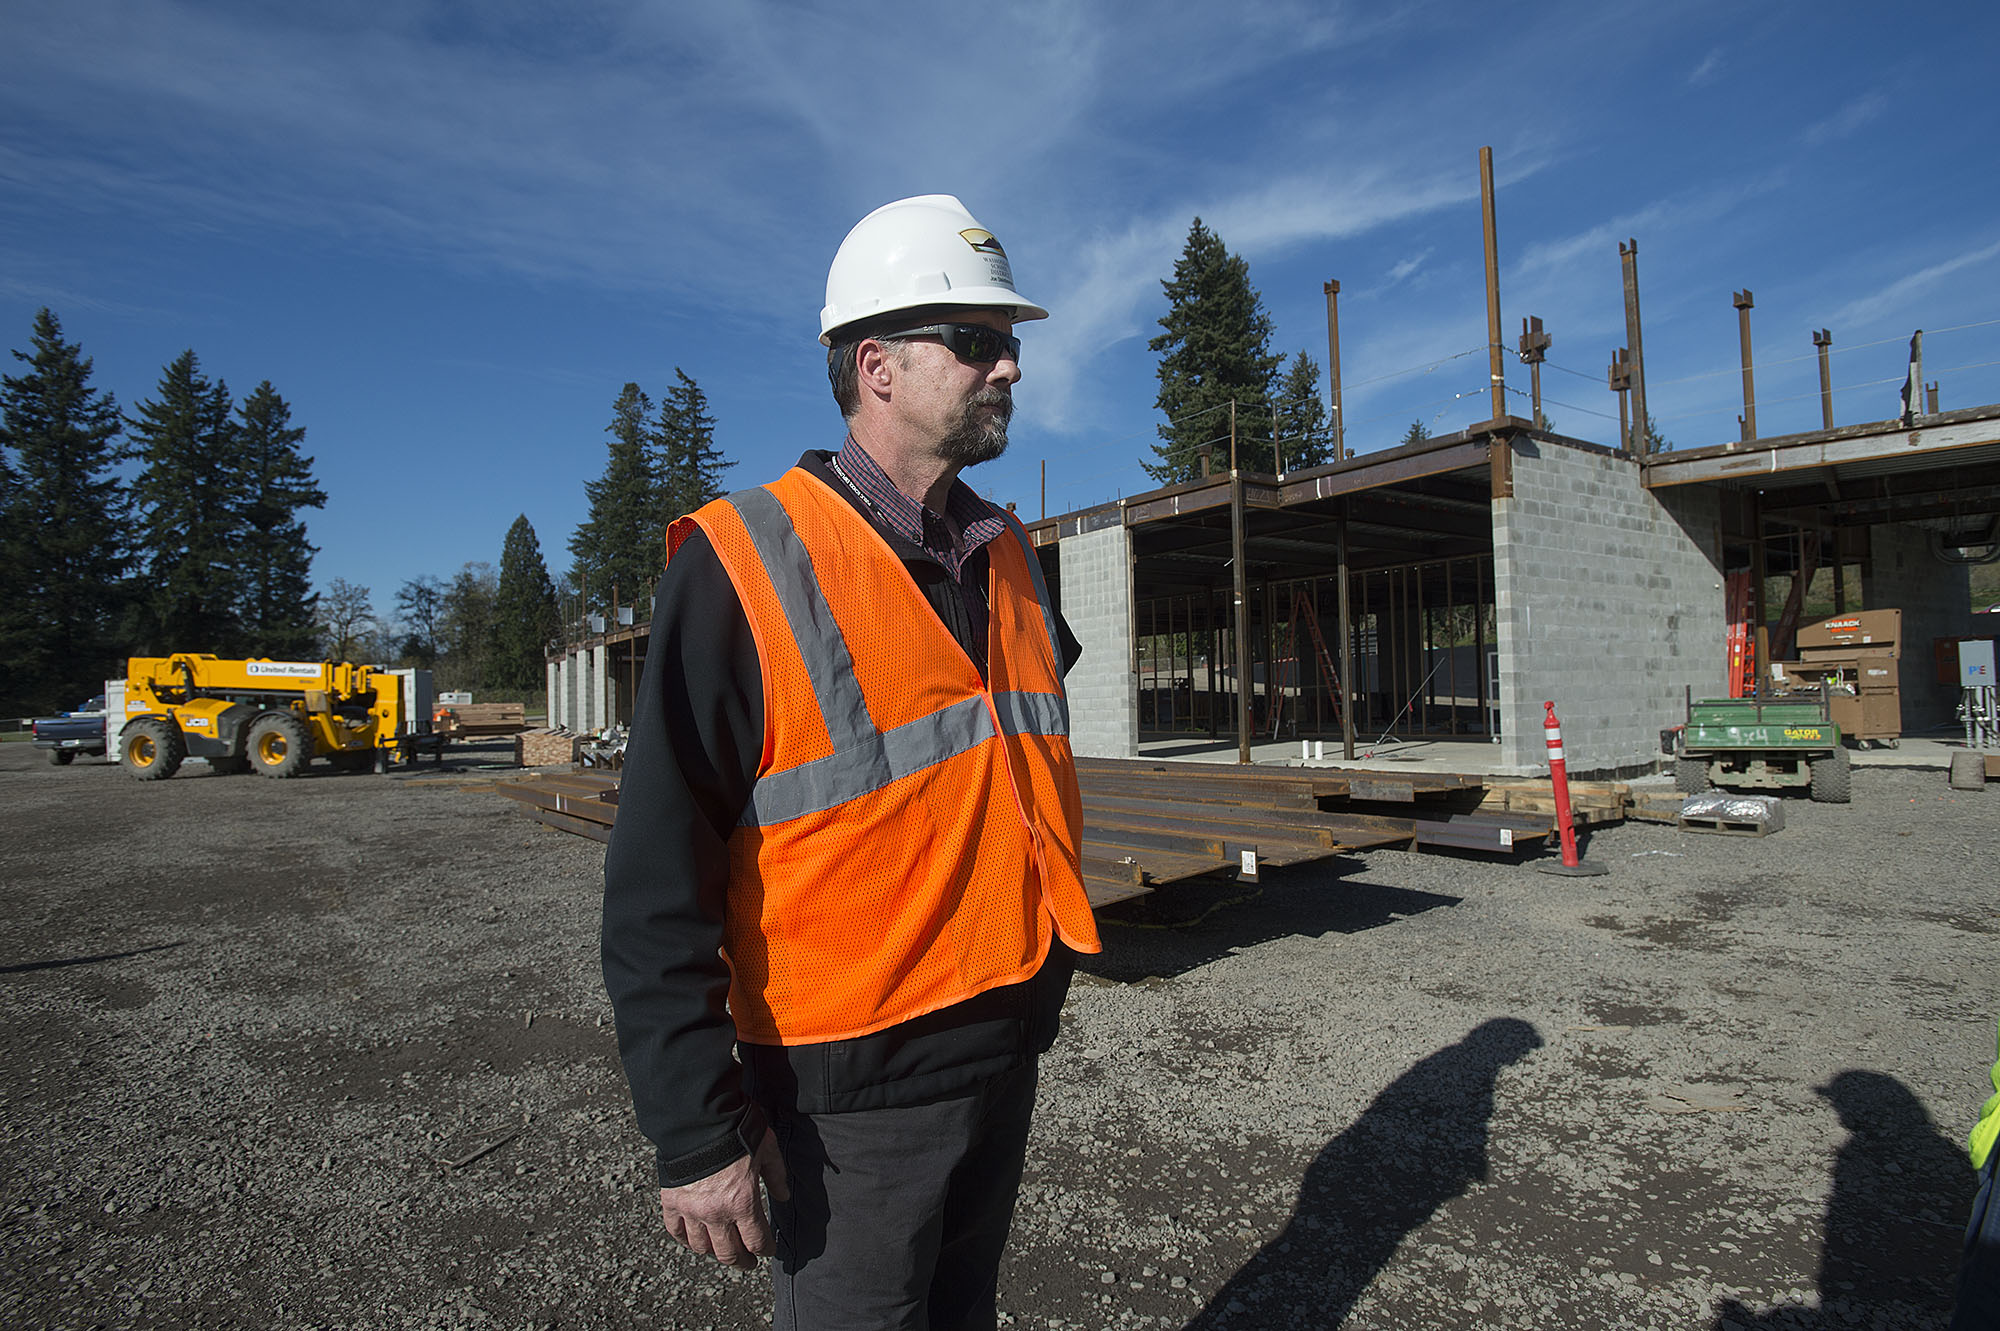 Joe Steinbrenner of the Washougal School District stands outside the new elementary school under construction in Washougal in November. The new school will be open this fall and will effect start times and bus routes for other schools in the district.